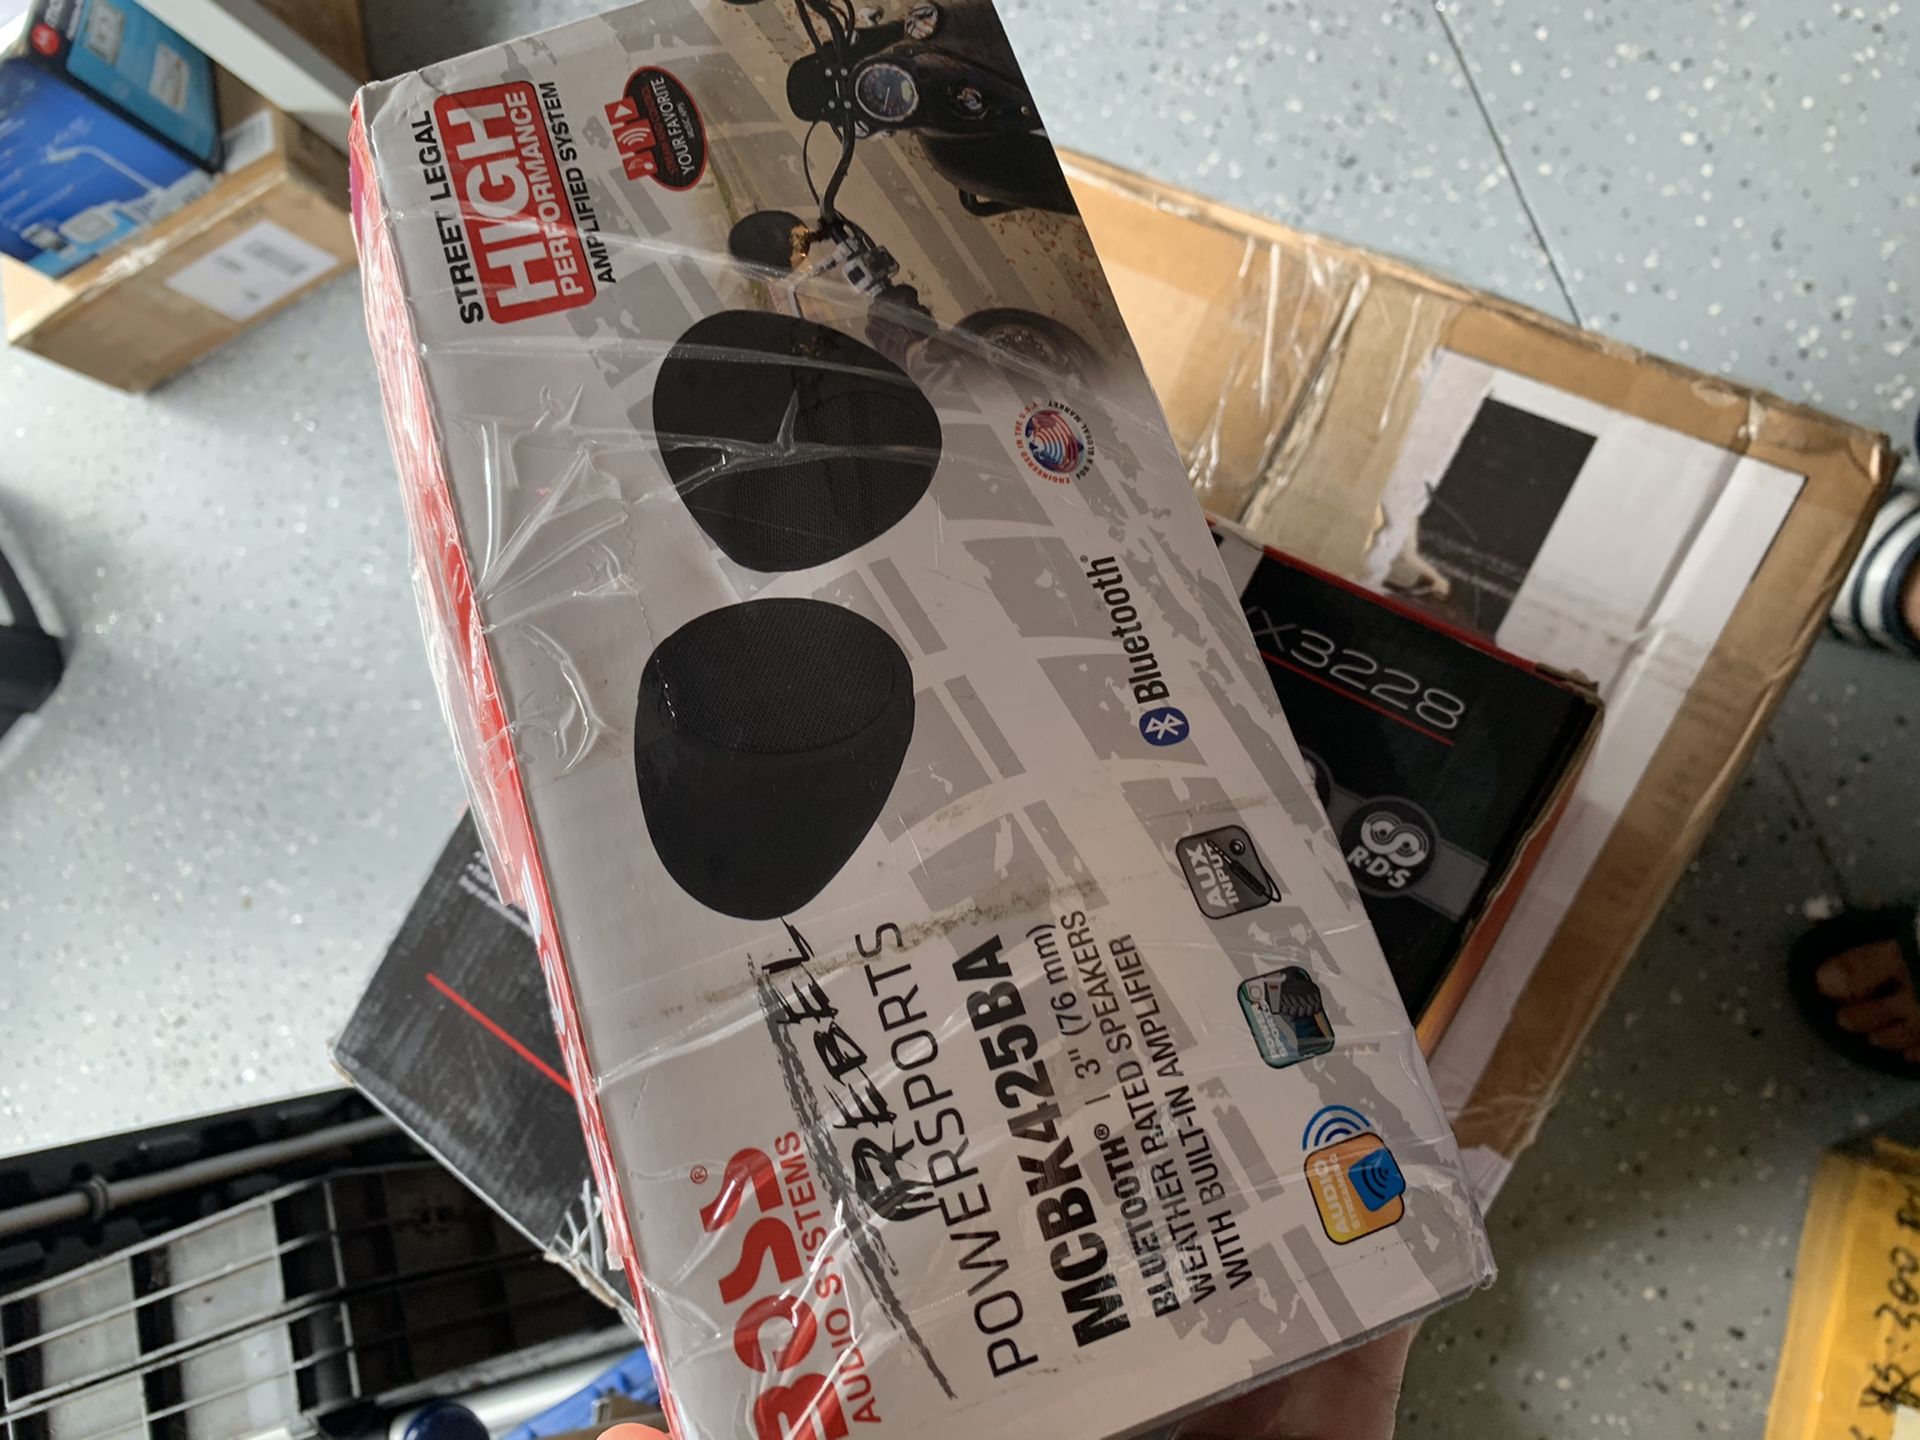 Boss rebel Powersports weather rated speakers